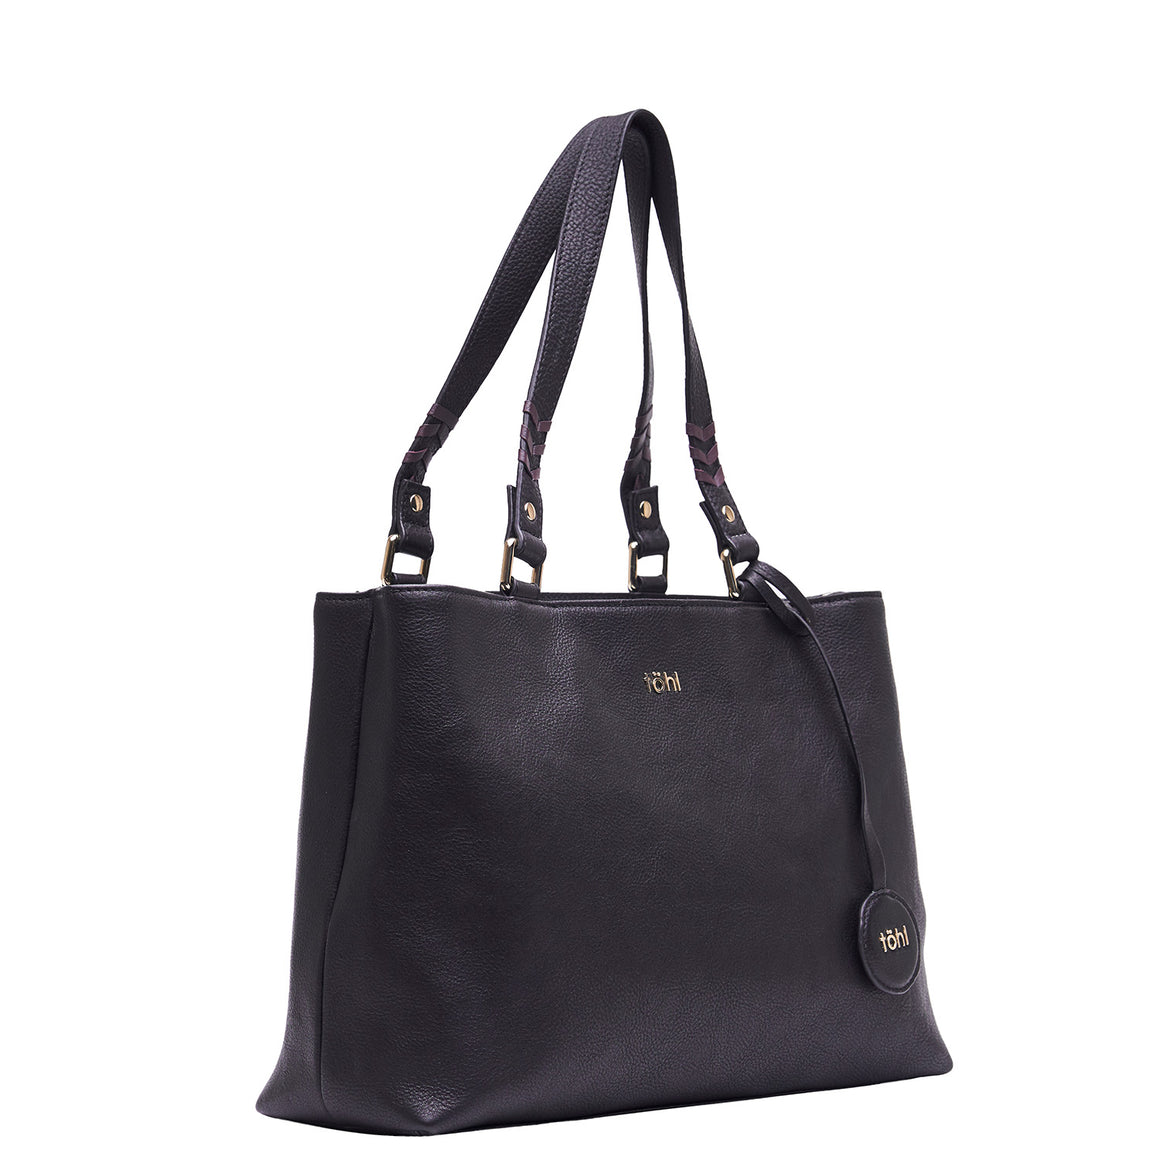 FABLE WOMEN'S TOTE BAG - CHARCOAL BLACK